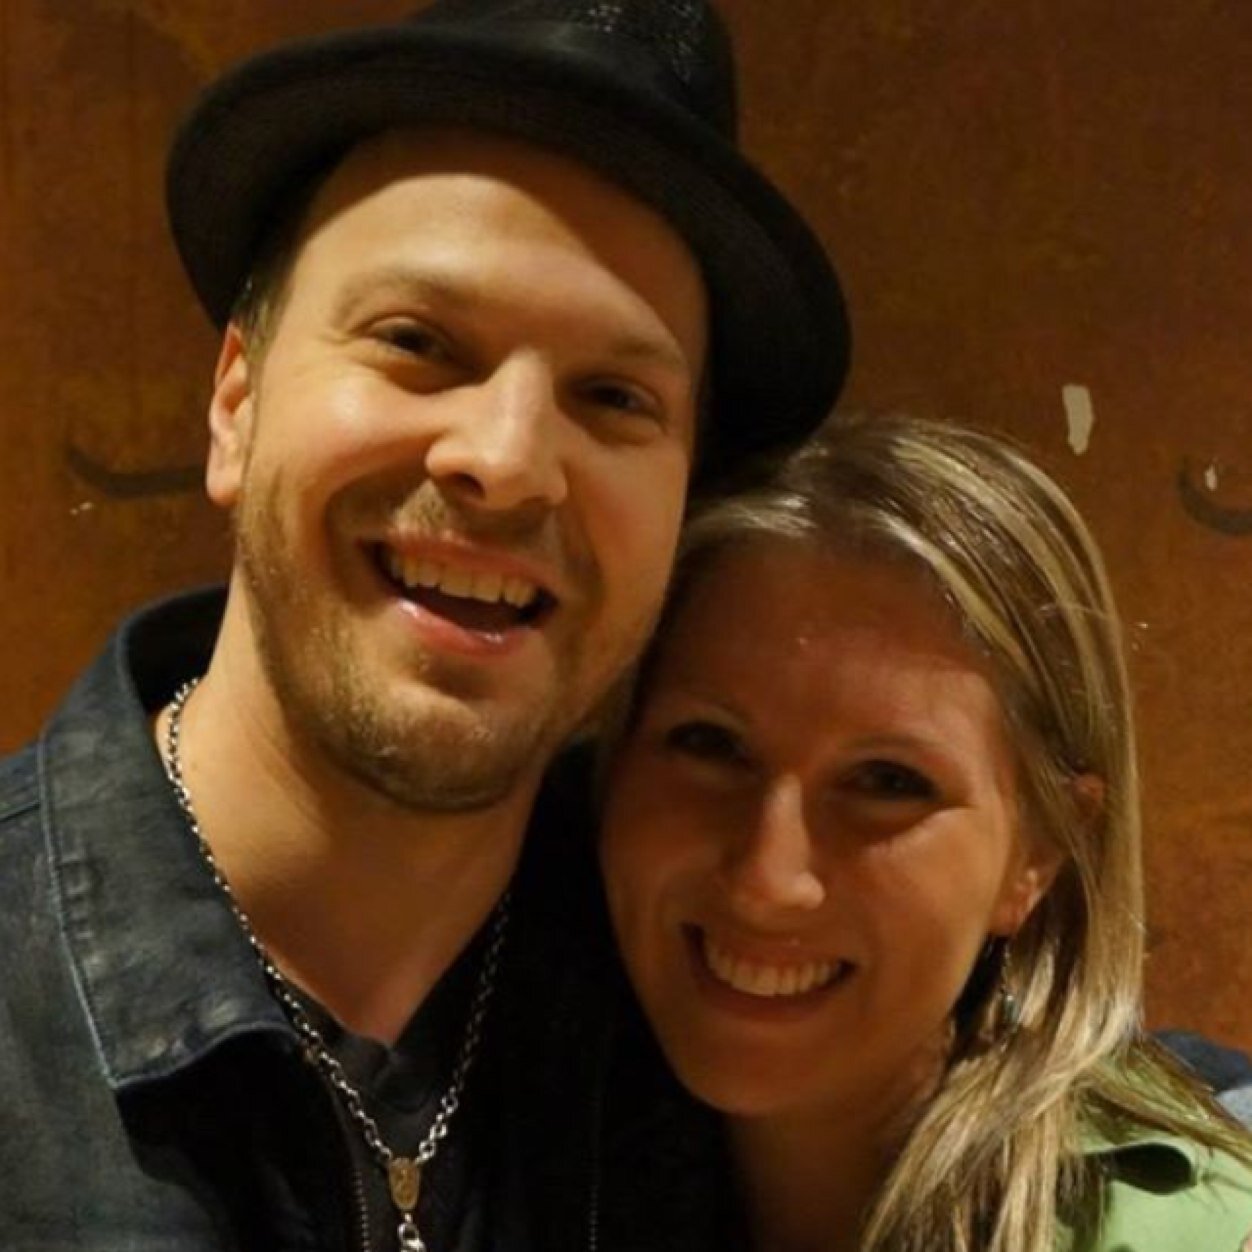 I'm Amanda from Texas, I love dogs and am a huge huge fan of Gavin DeGraw! He's just the best!! #GDGFan4Life